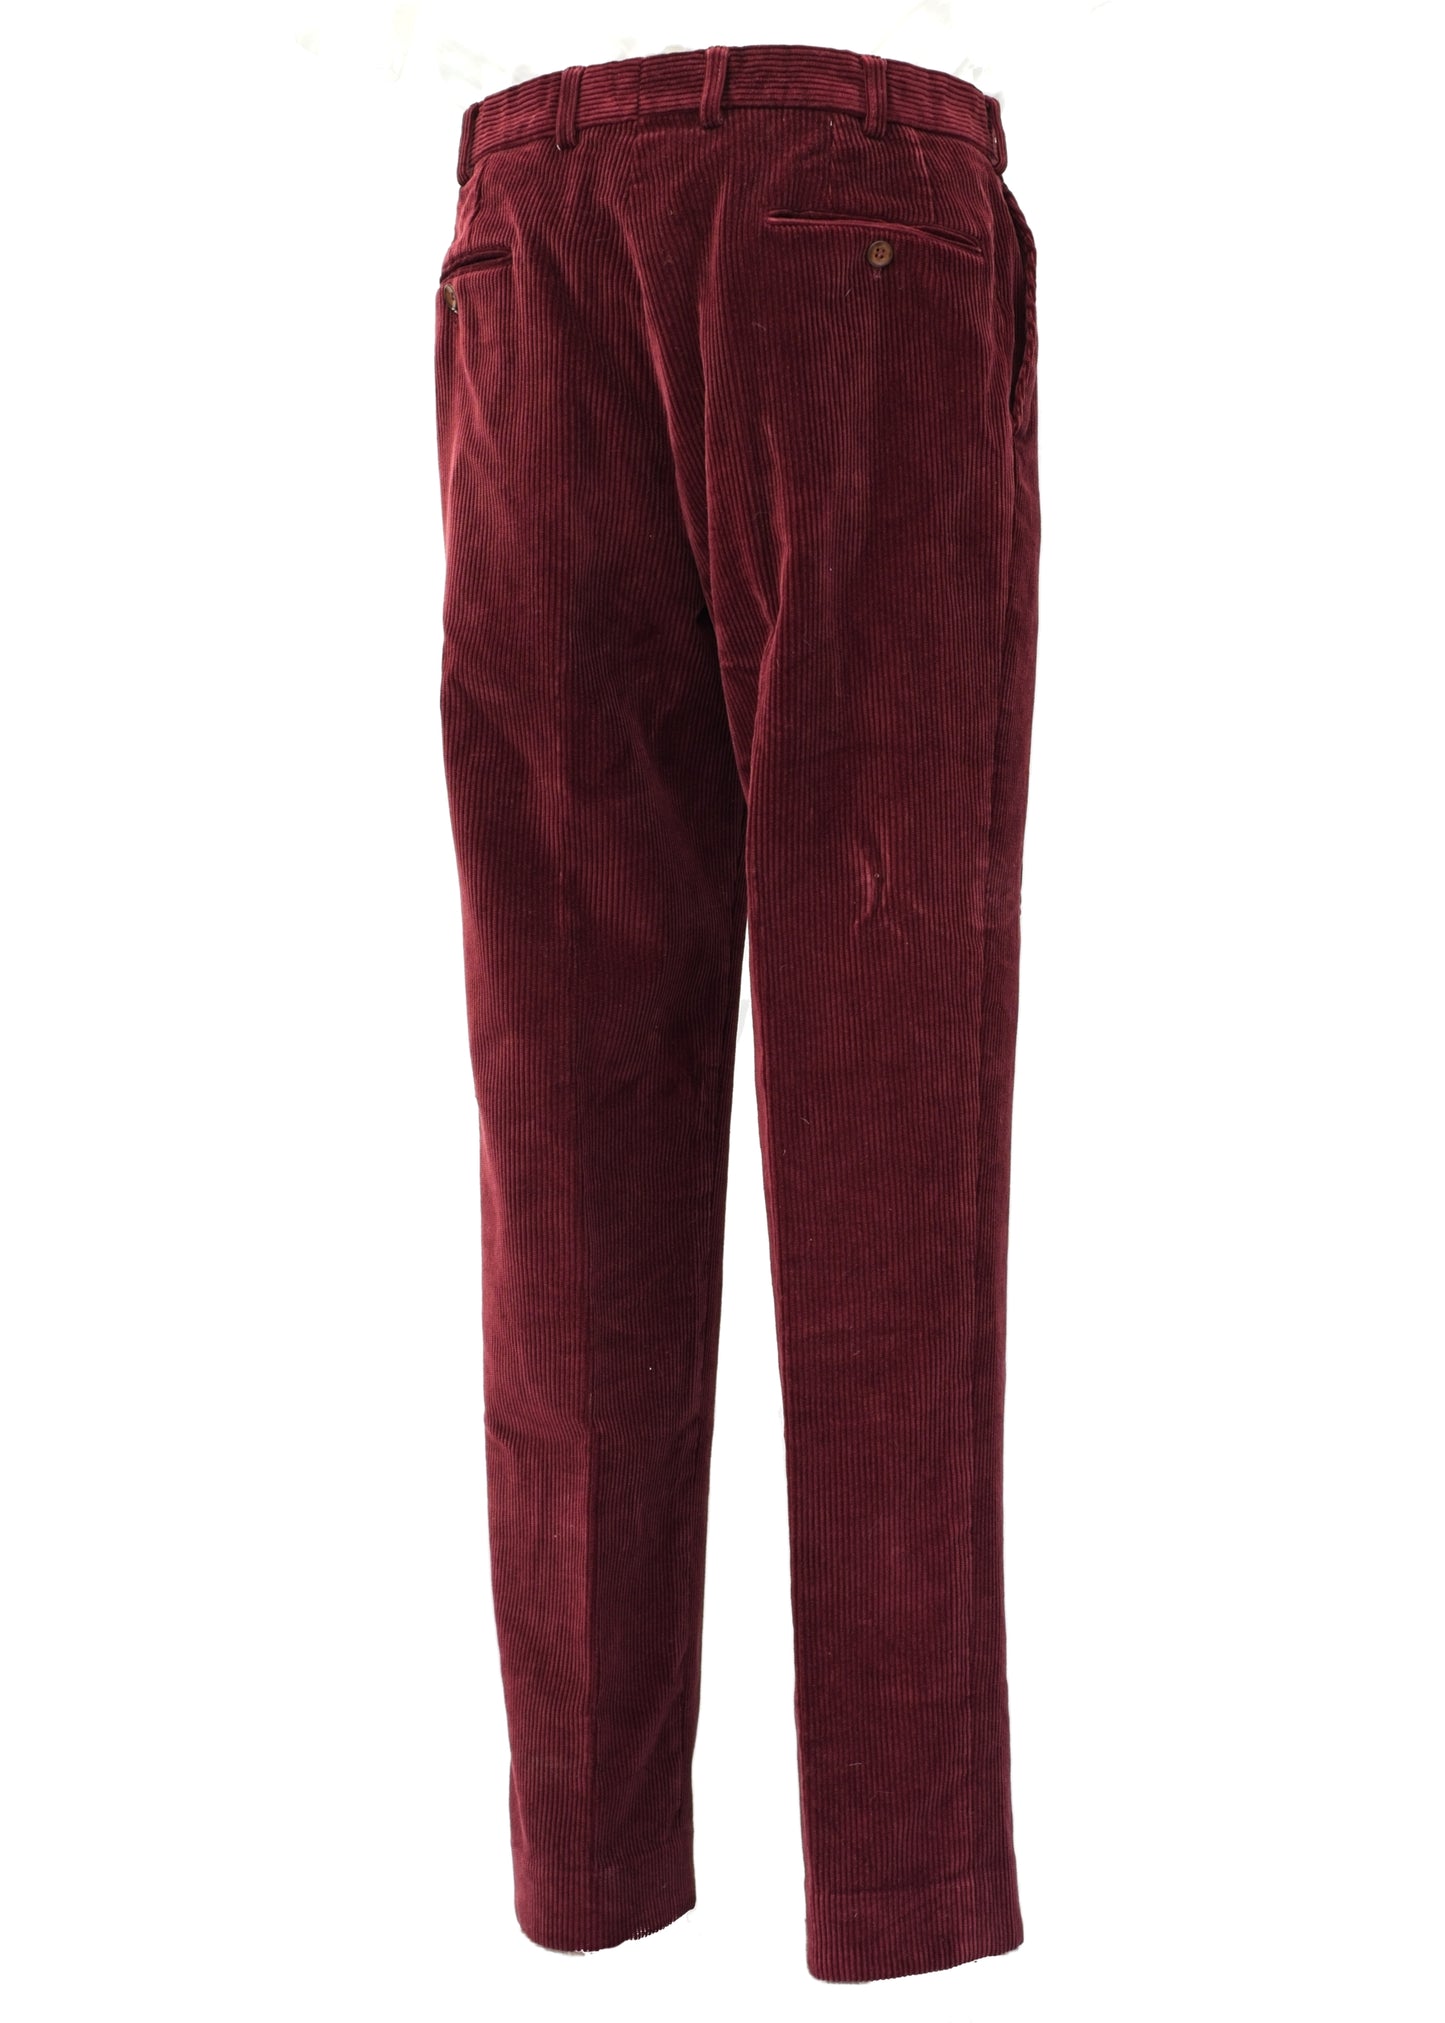 Burgundy Wine Chunky Corduroy Country Trousers by Magee